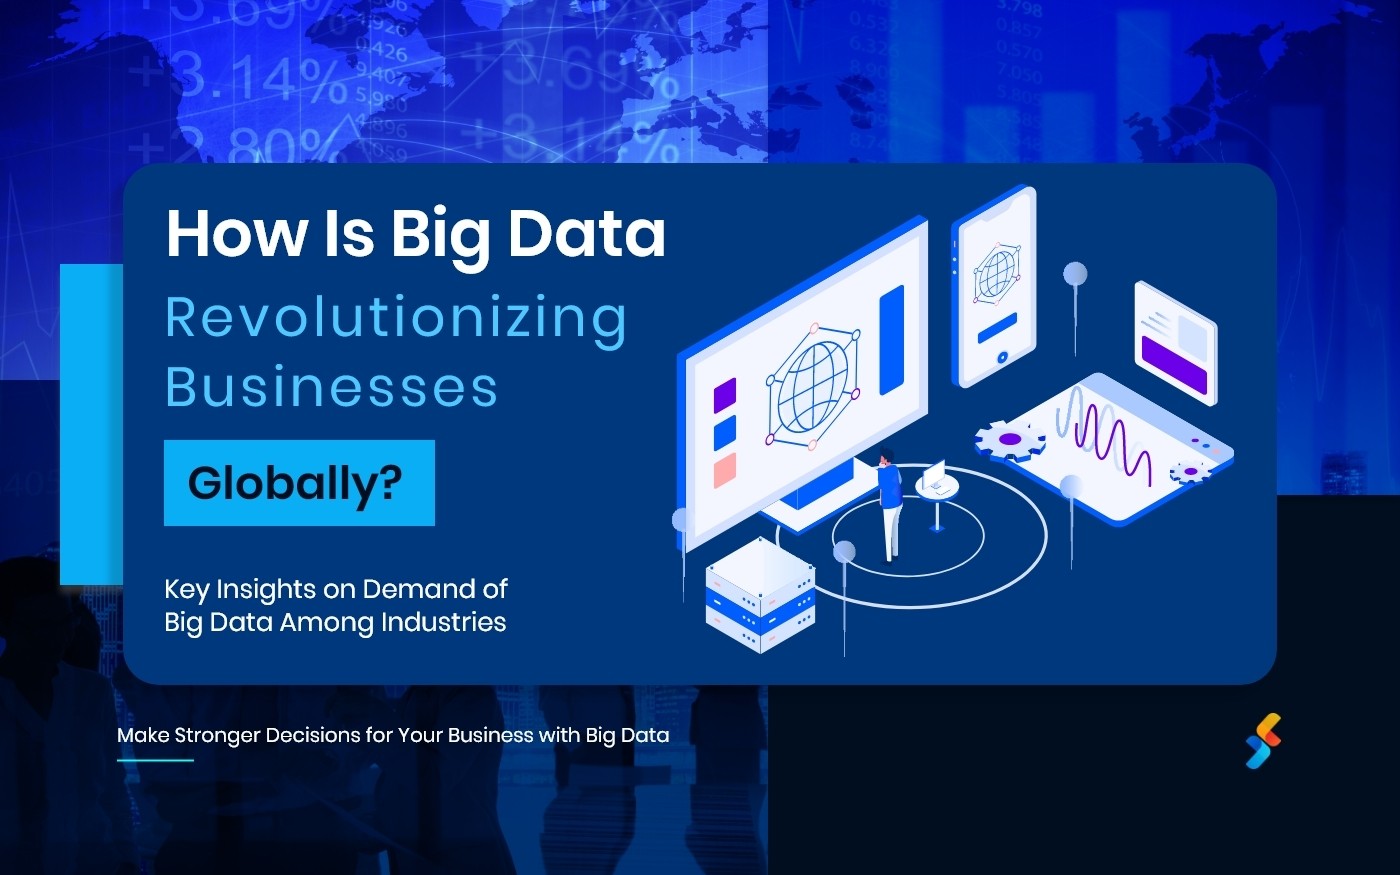 How Is Big Data Revolutionizing Businesses Globally?